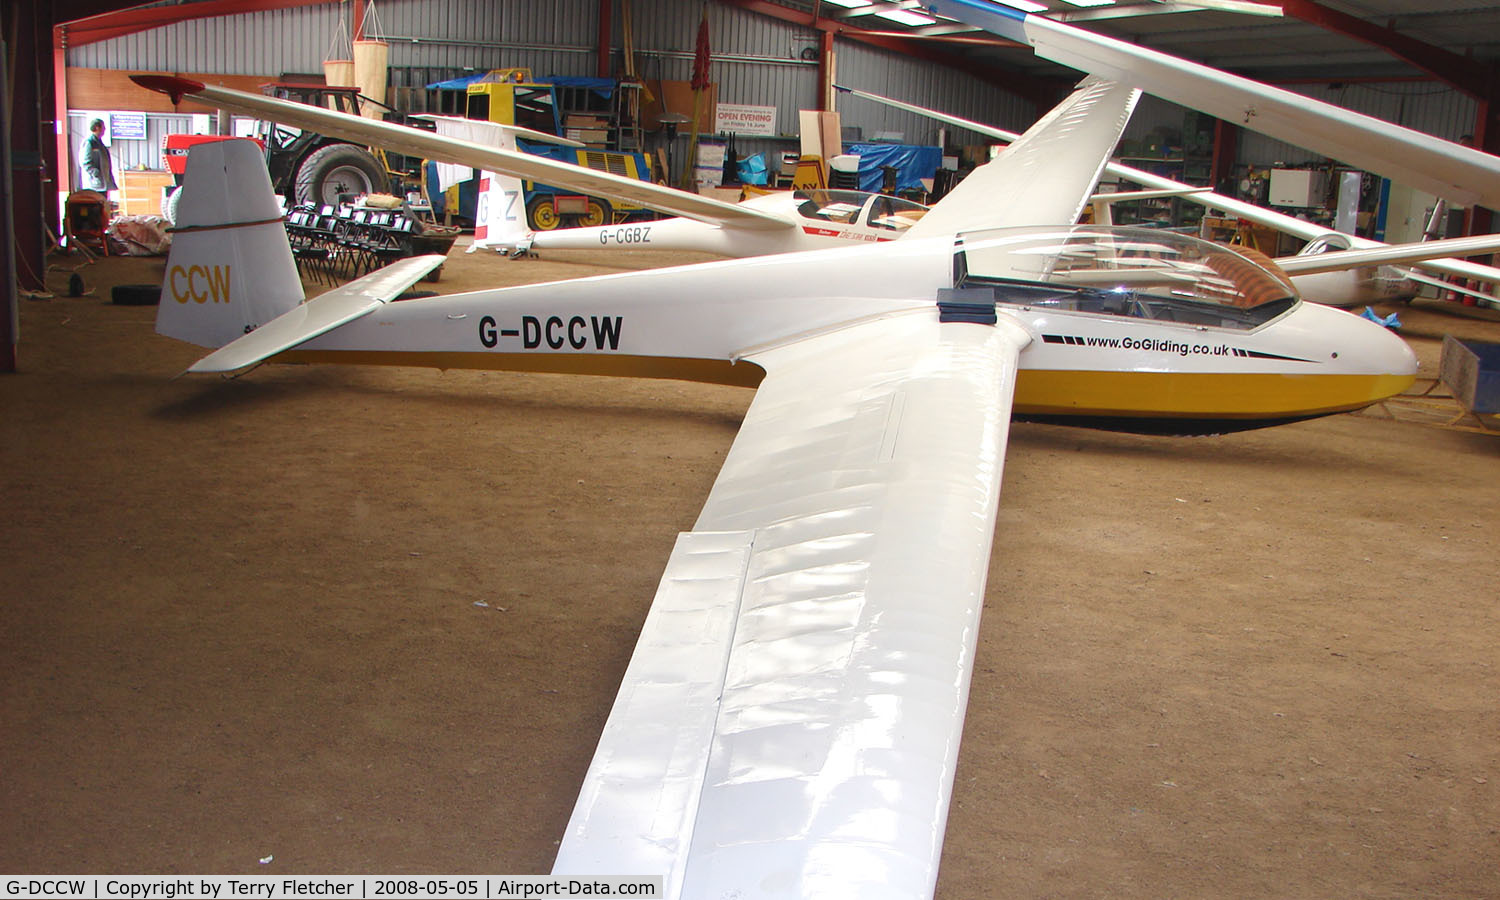 G-DCCW, 1967 Schleicher ASK-13 C/N 13051, A recent addition to the British Register at Needwood Forest Gliding Centre